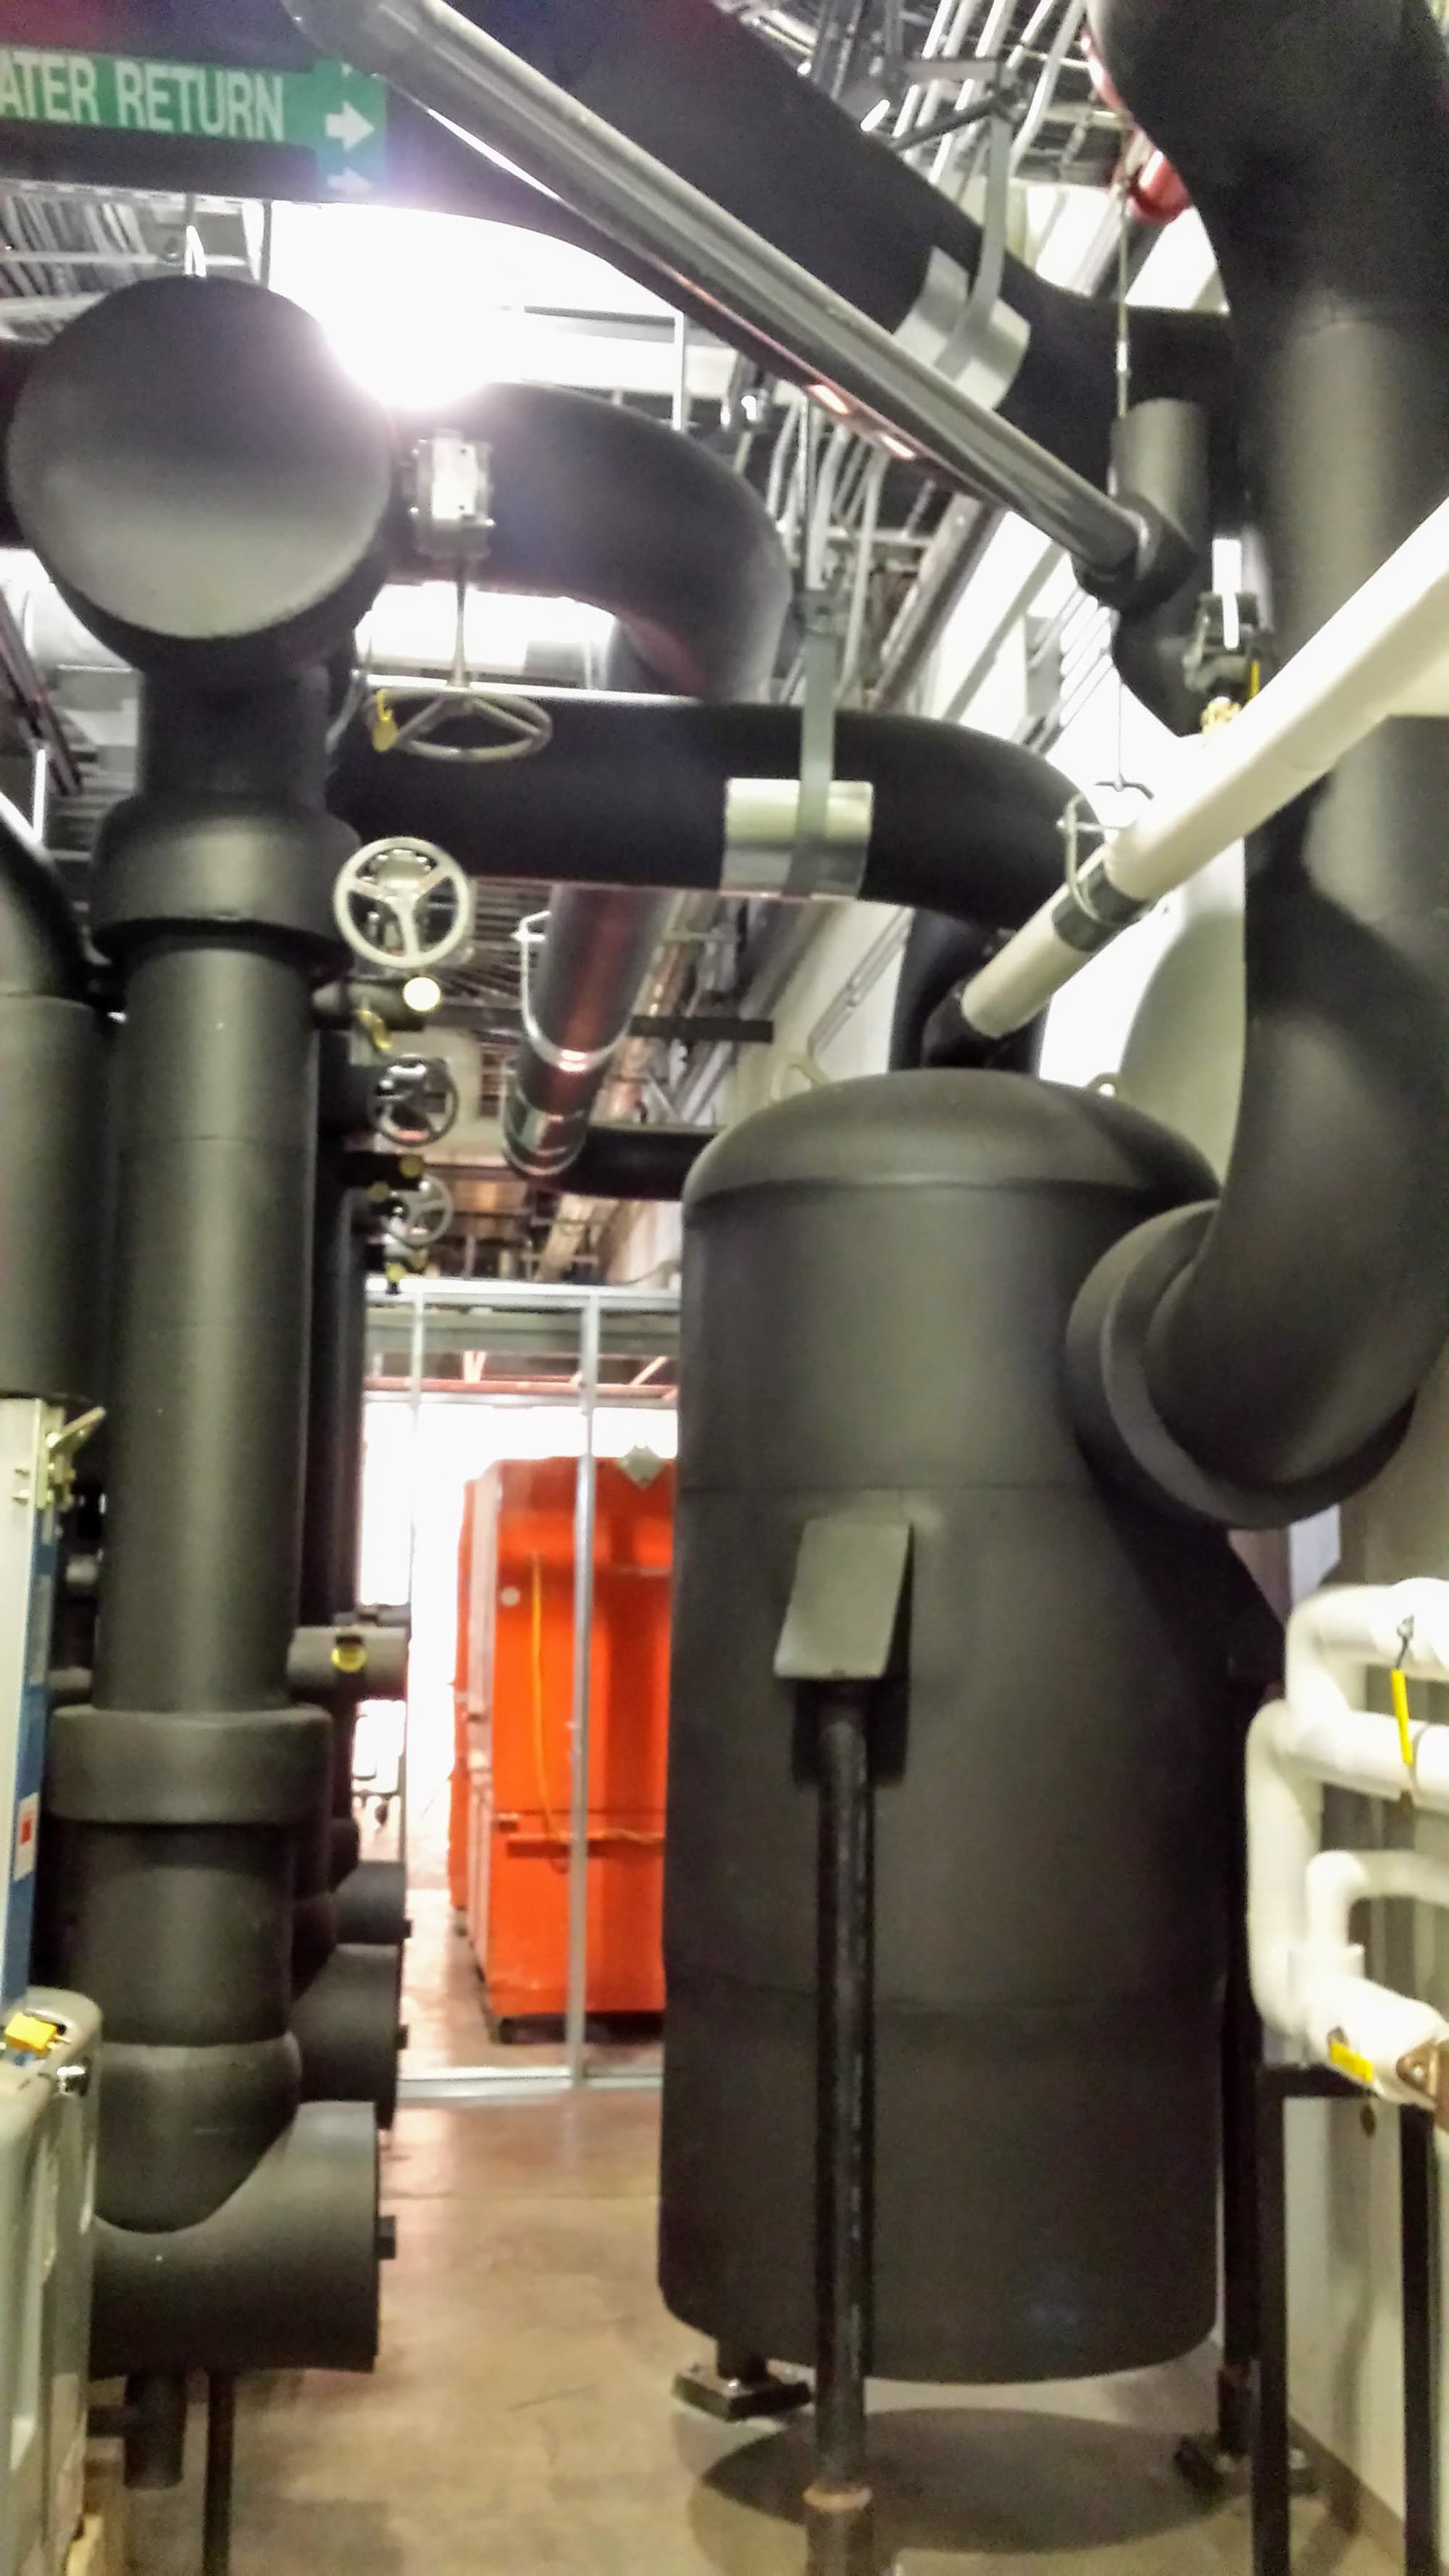 Elastomeric Closed-Cell Rubber Insulation over Chilled Water Piping, Pumps and Tanks